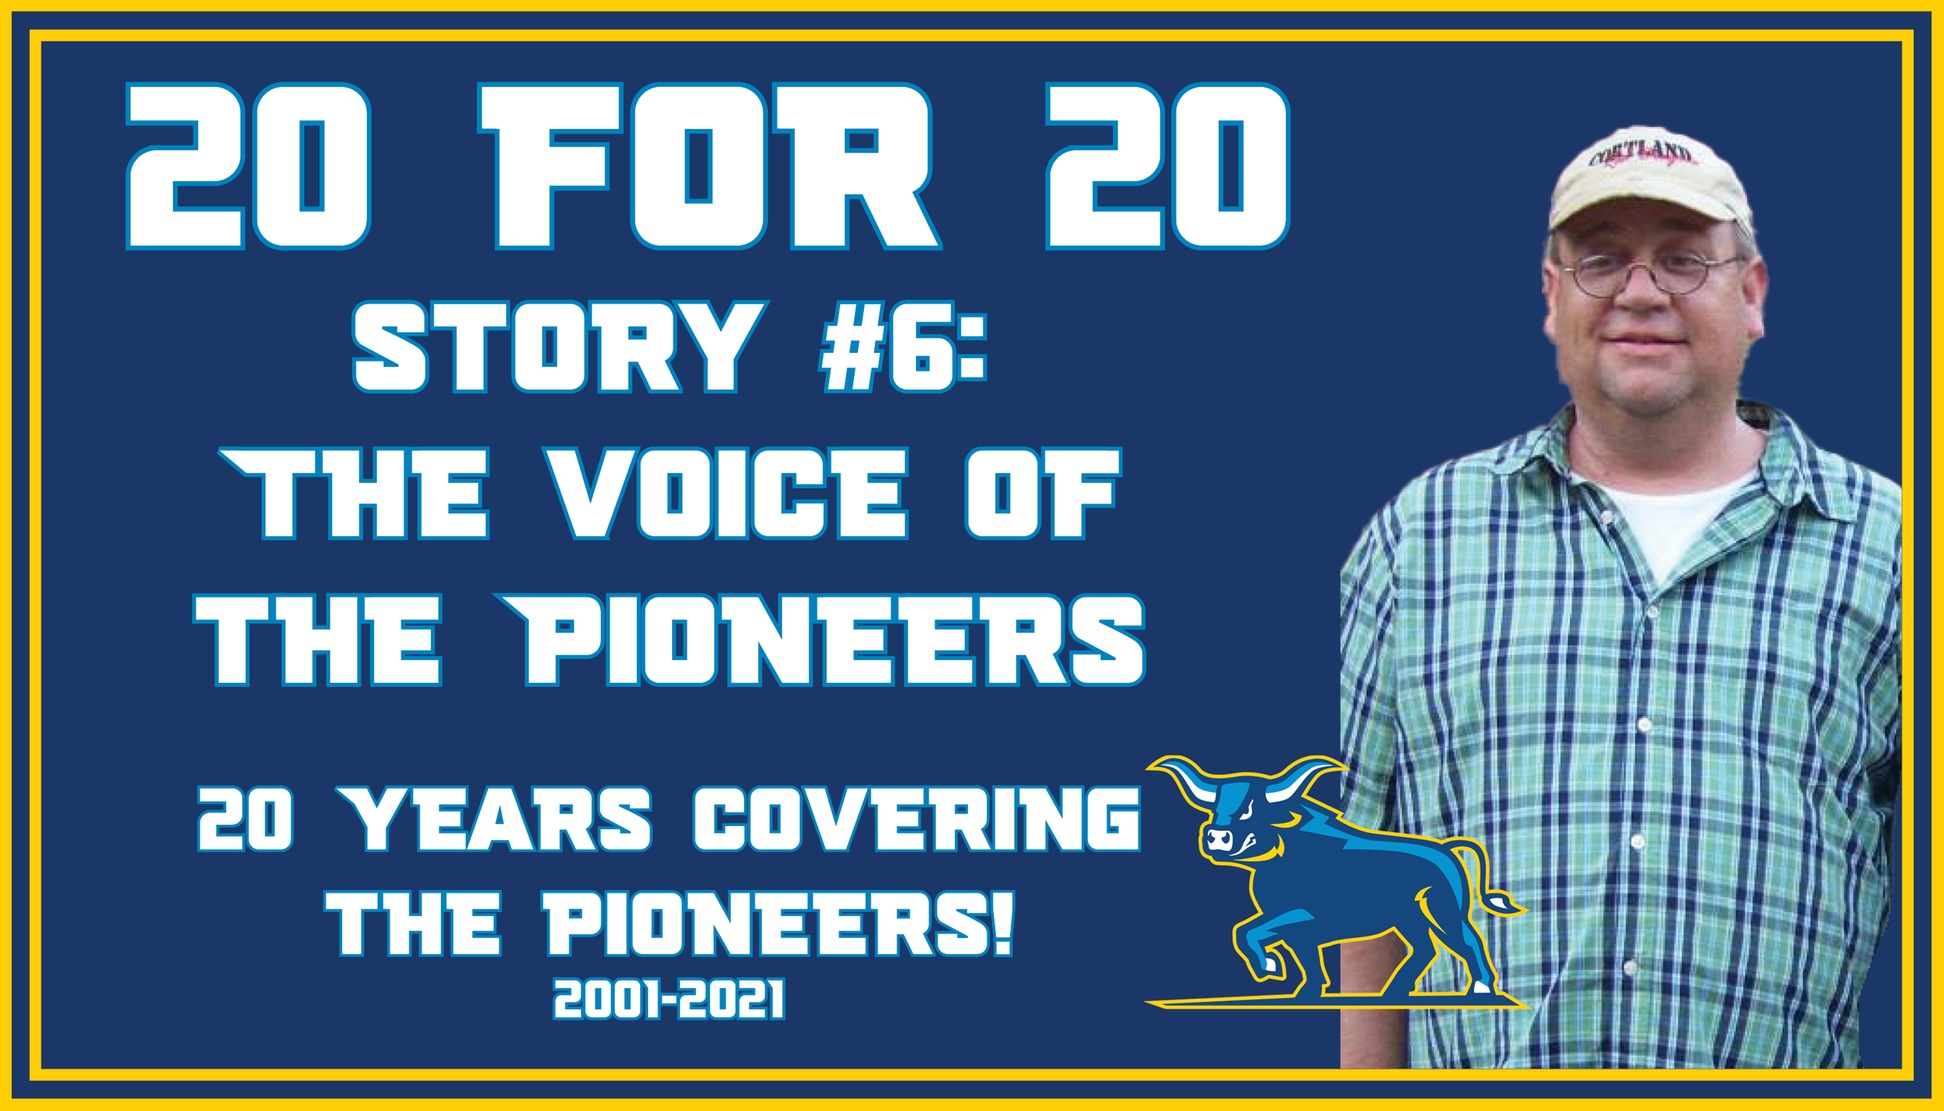 20 fpr 20 - The Voice of the Pioneers
Picture of Craig Hoyt